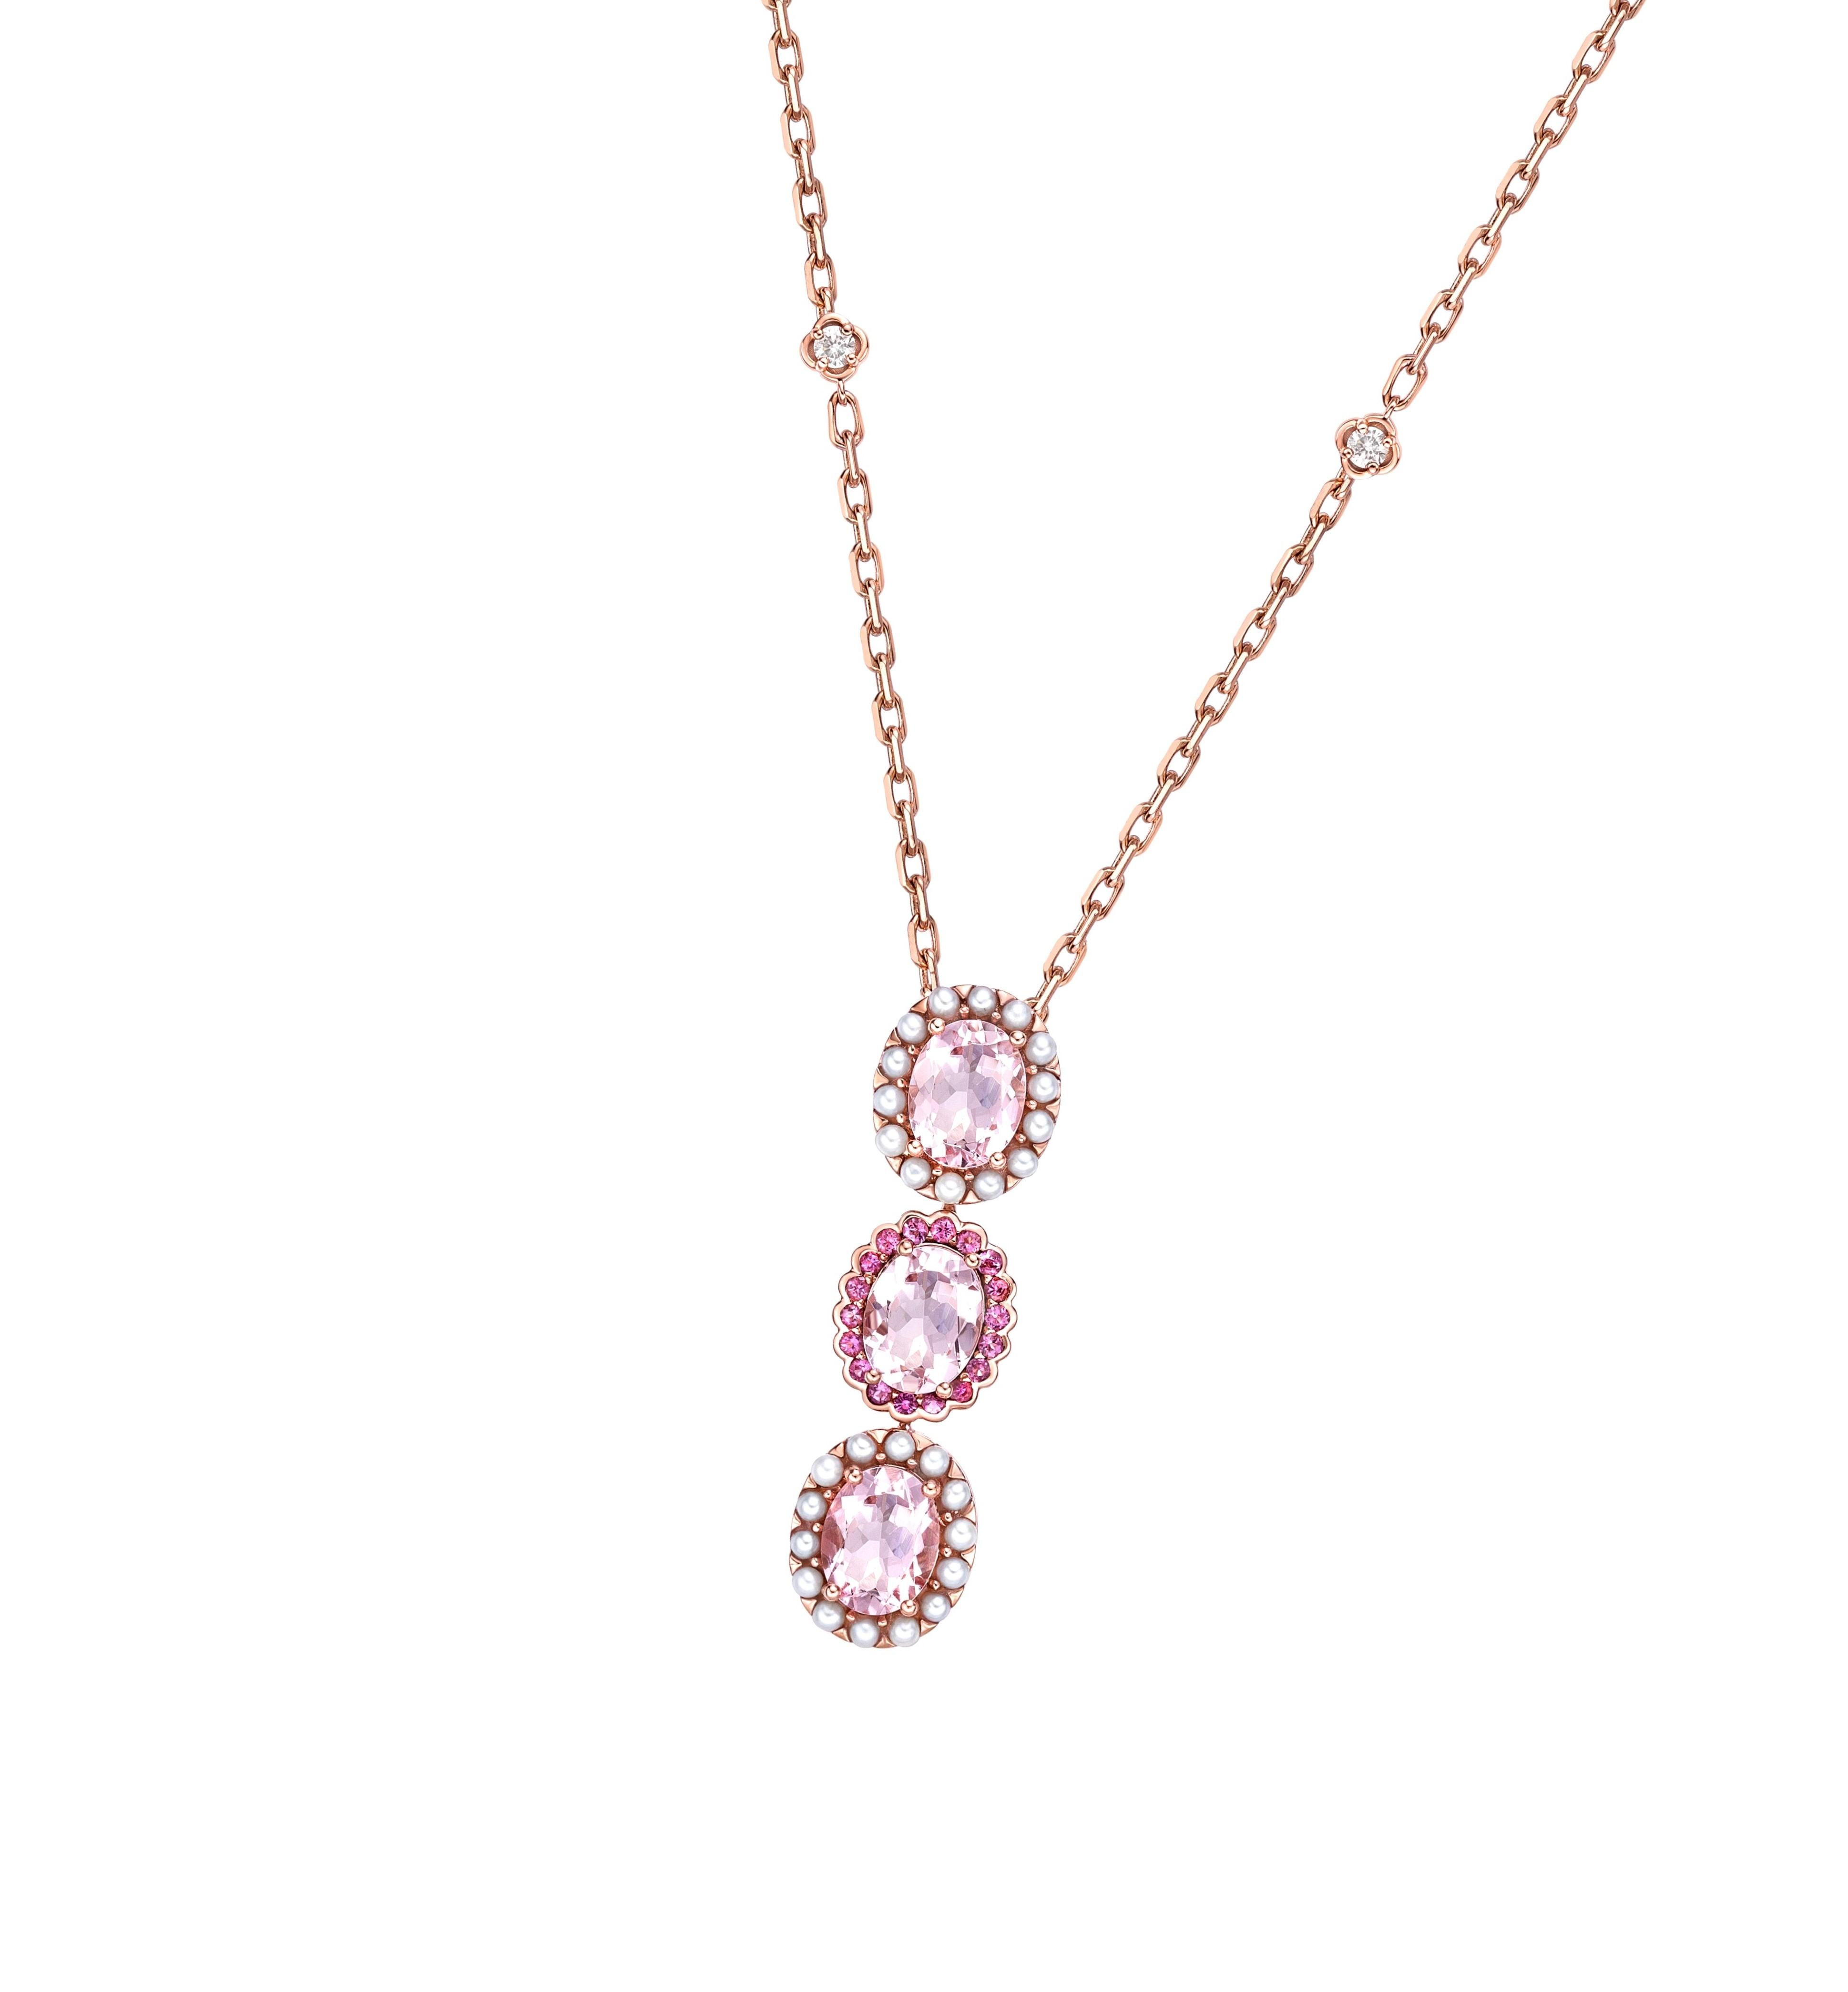 Oval Cut Pink Morganite Pendant Necklace with Tourmaline, Pearl & Diamond in 18KRG. For Sale